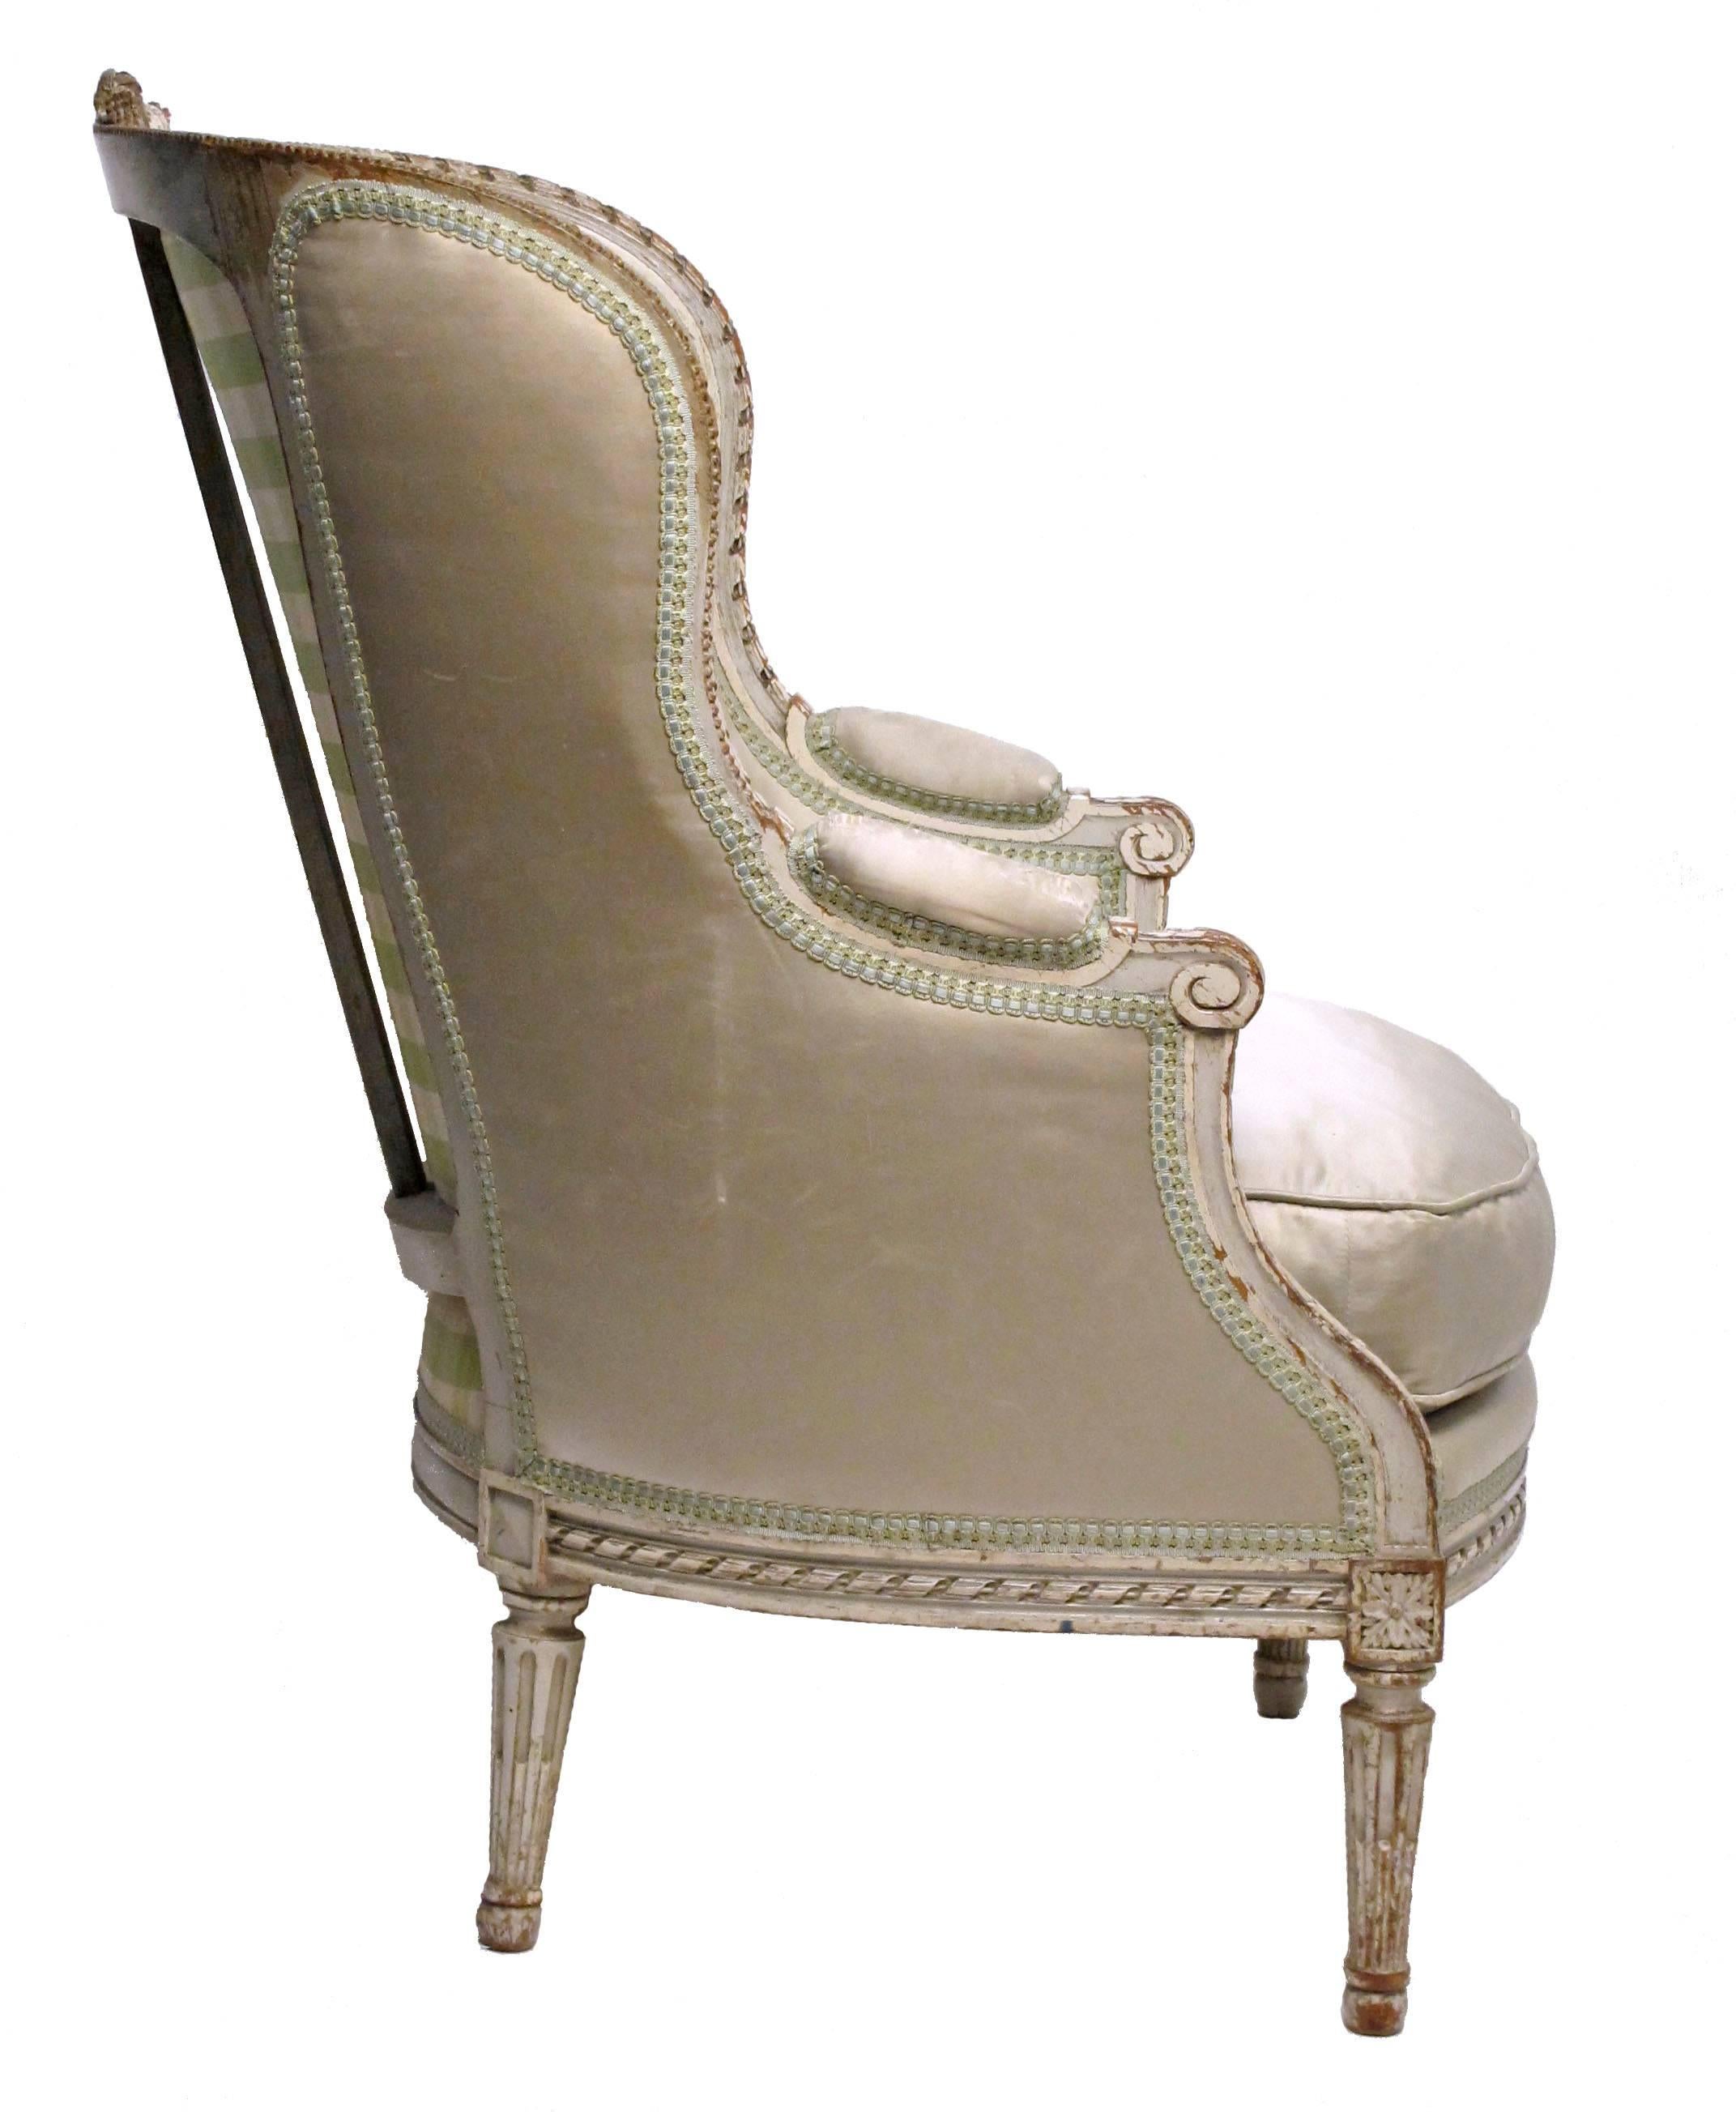 Carved Louis XVI Style Bergere Chair, French, circa 1920